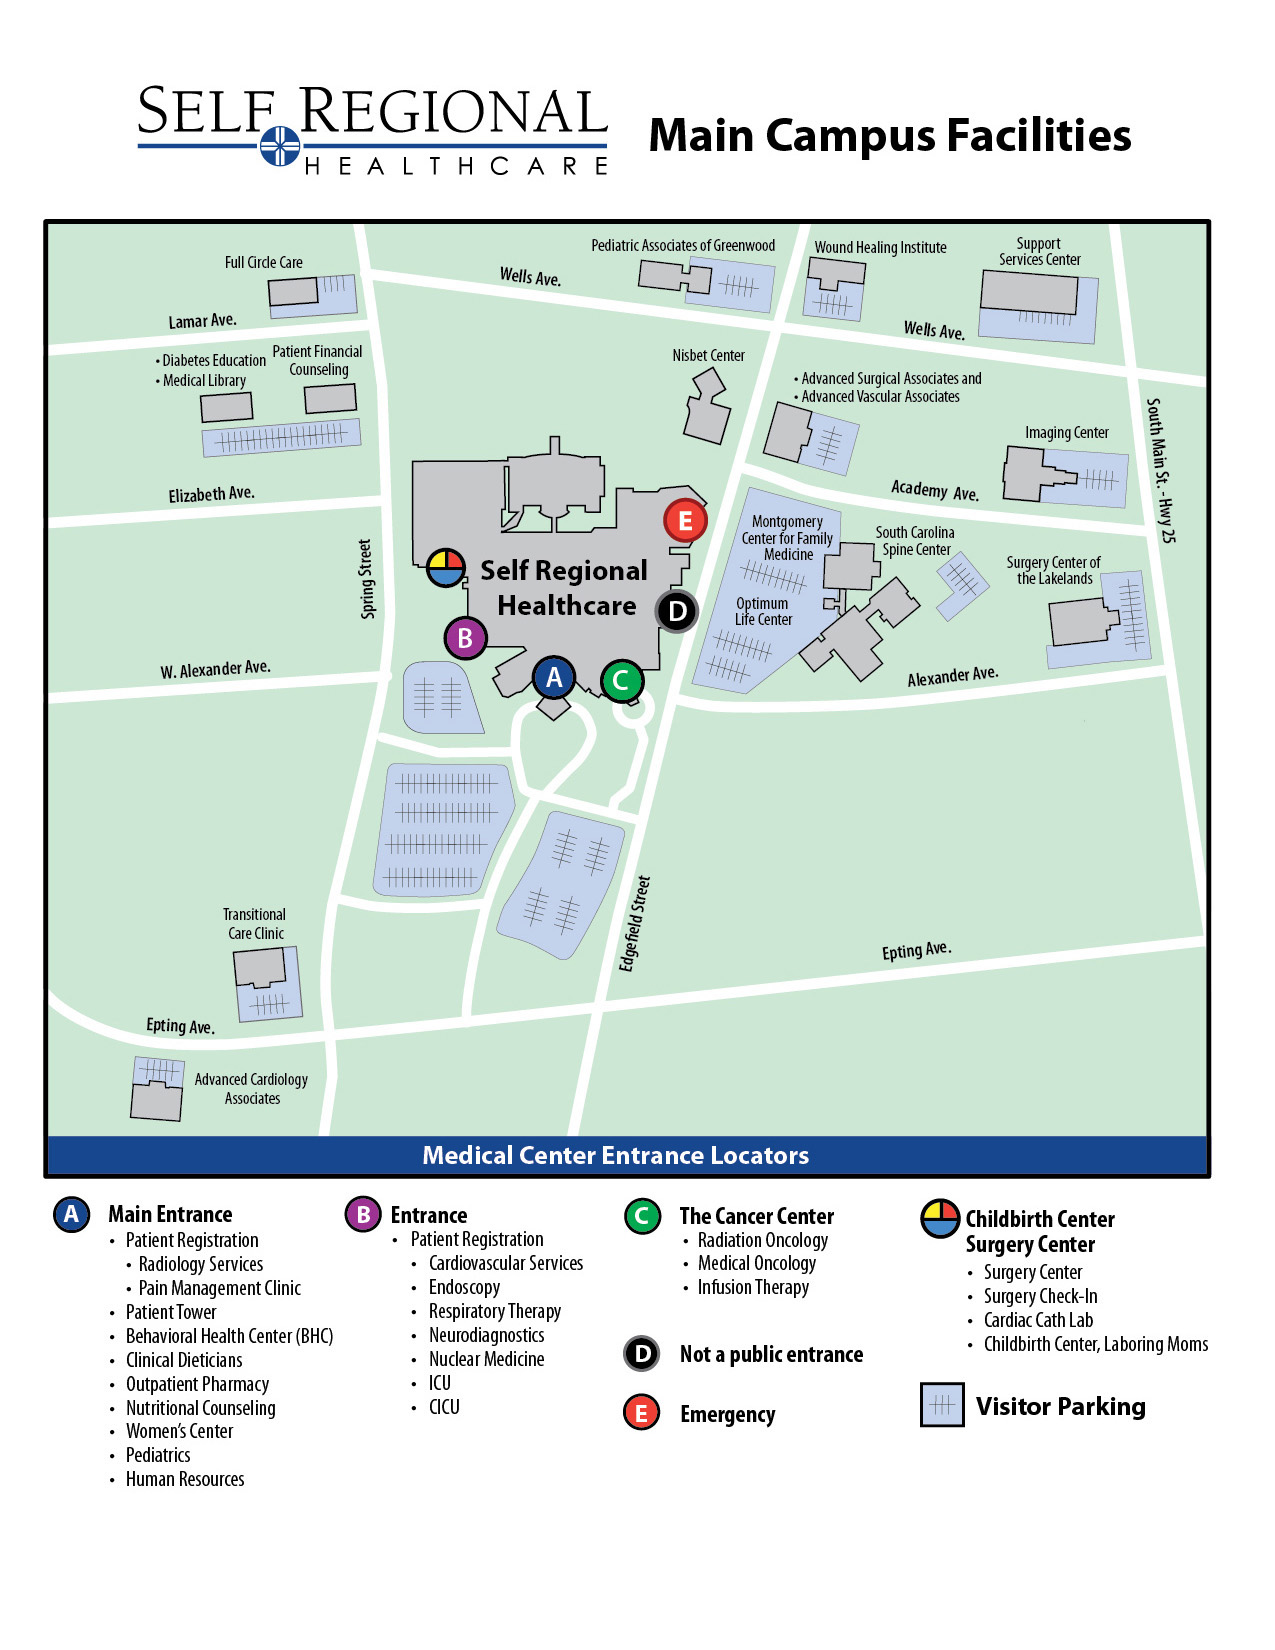 The main entrances at Self Regional Medical Center are A, B, C is Cancer Center, E is Emergency, and the Childbirth and Surgery Center. Other main campus facilities include the Imaging Center, Pediatric Associates of Greenwood, the Wound Healing Institute, Transitional Care Clinic, and more.